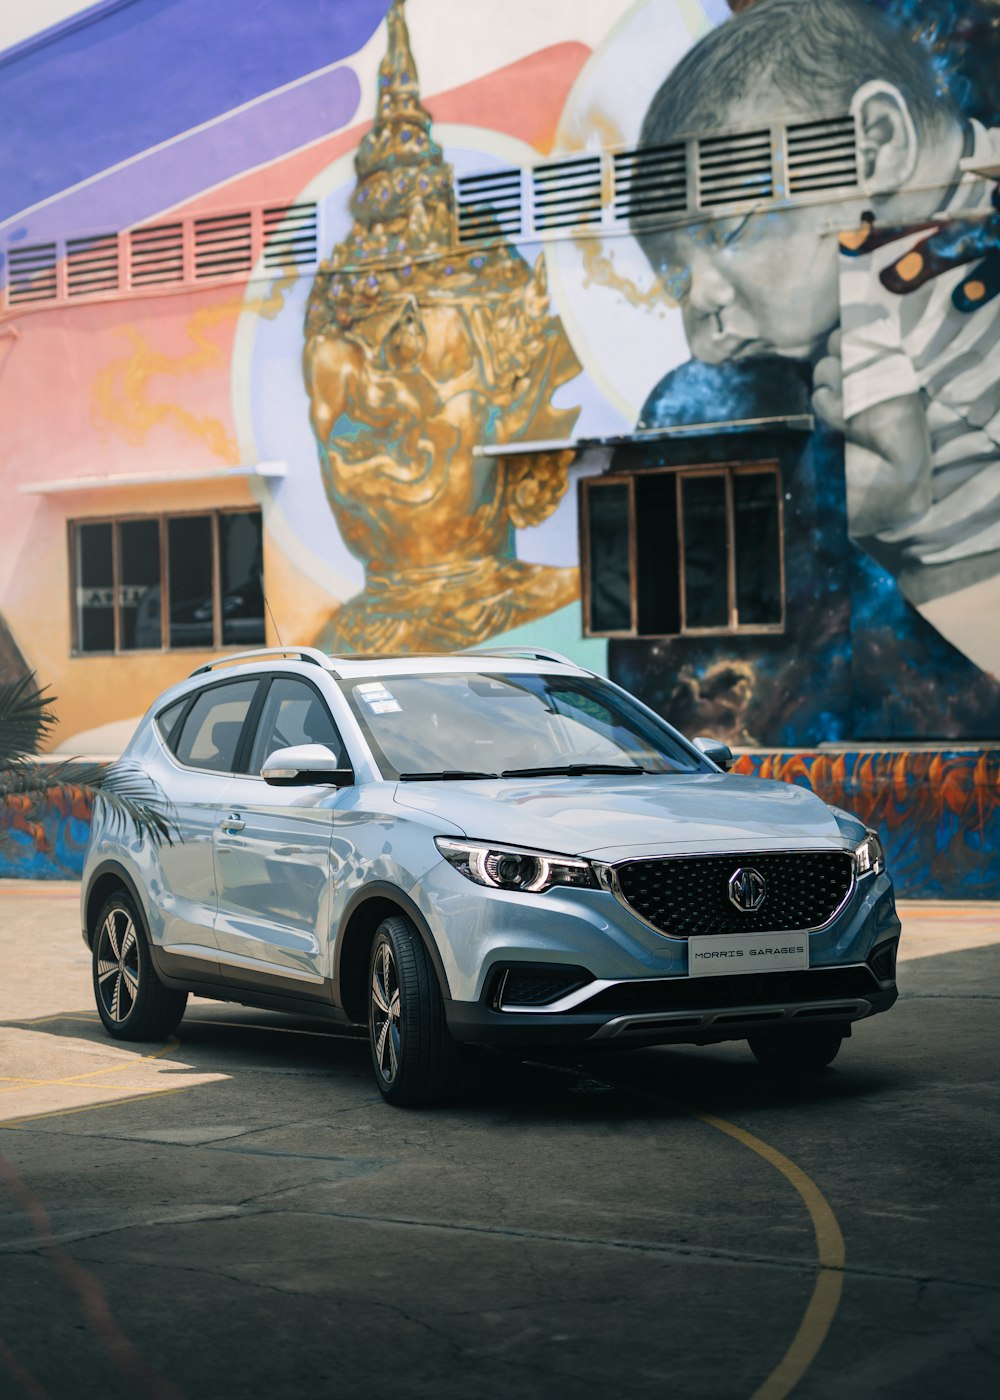 a silver car parked in front of a colorful building